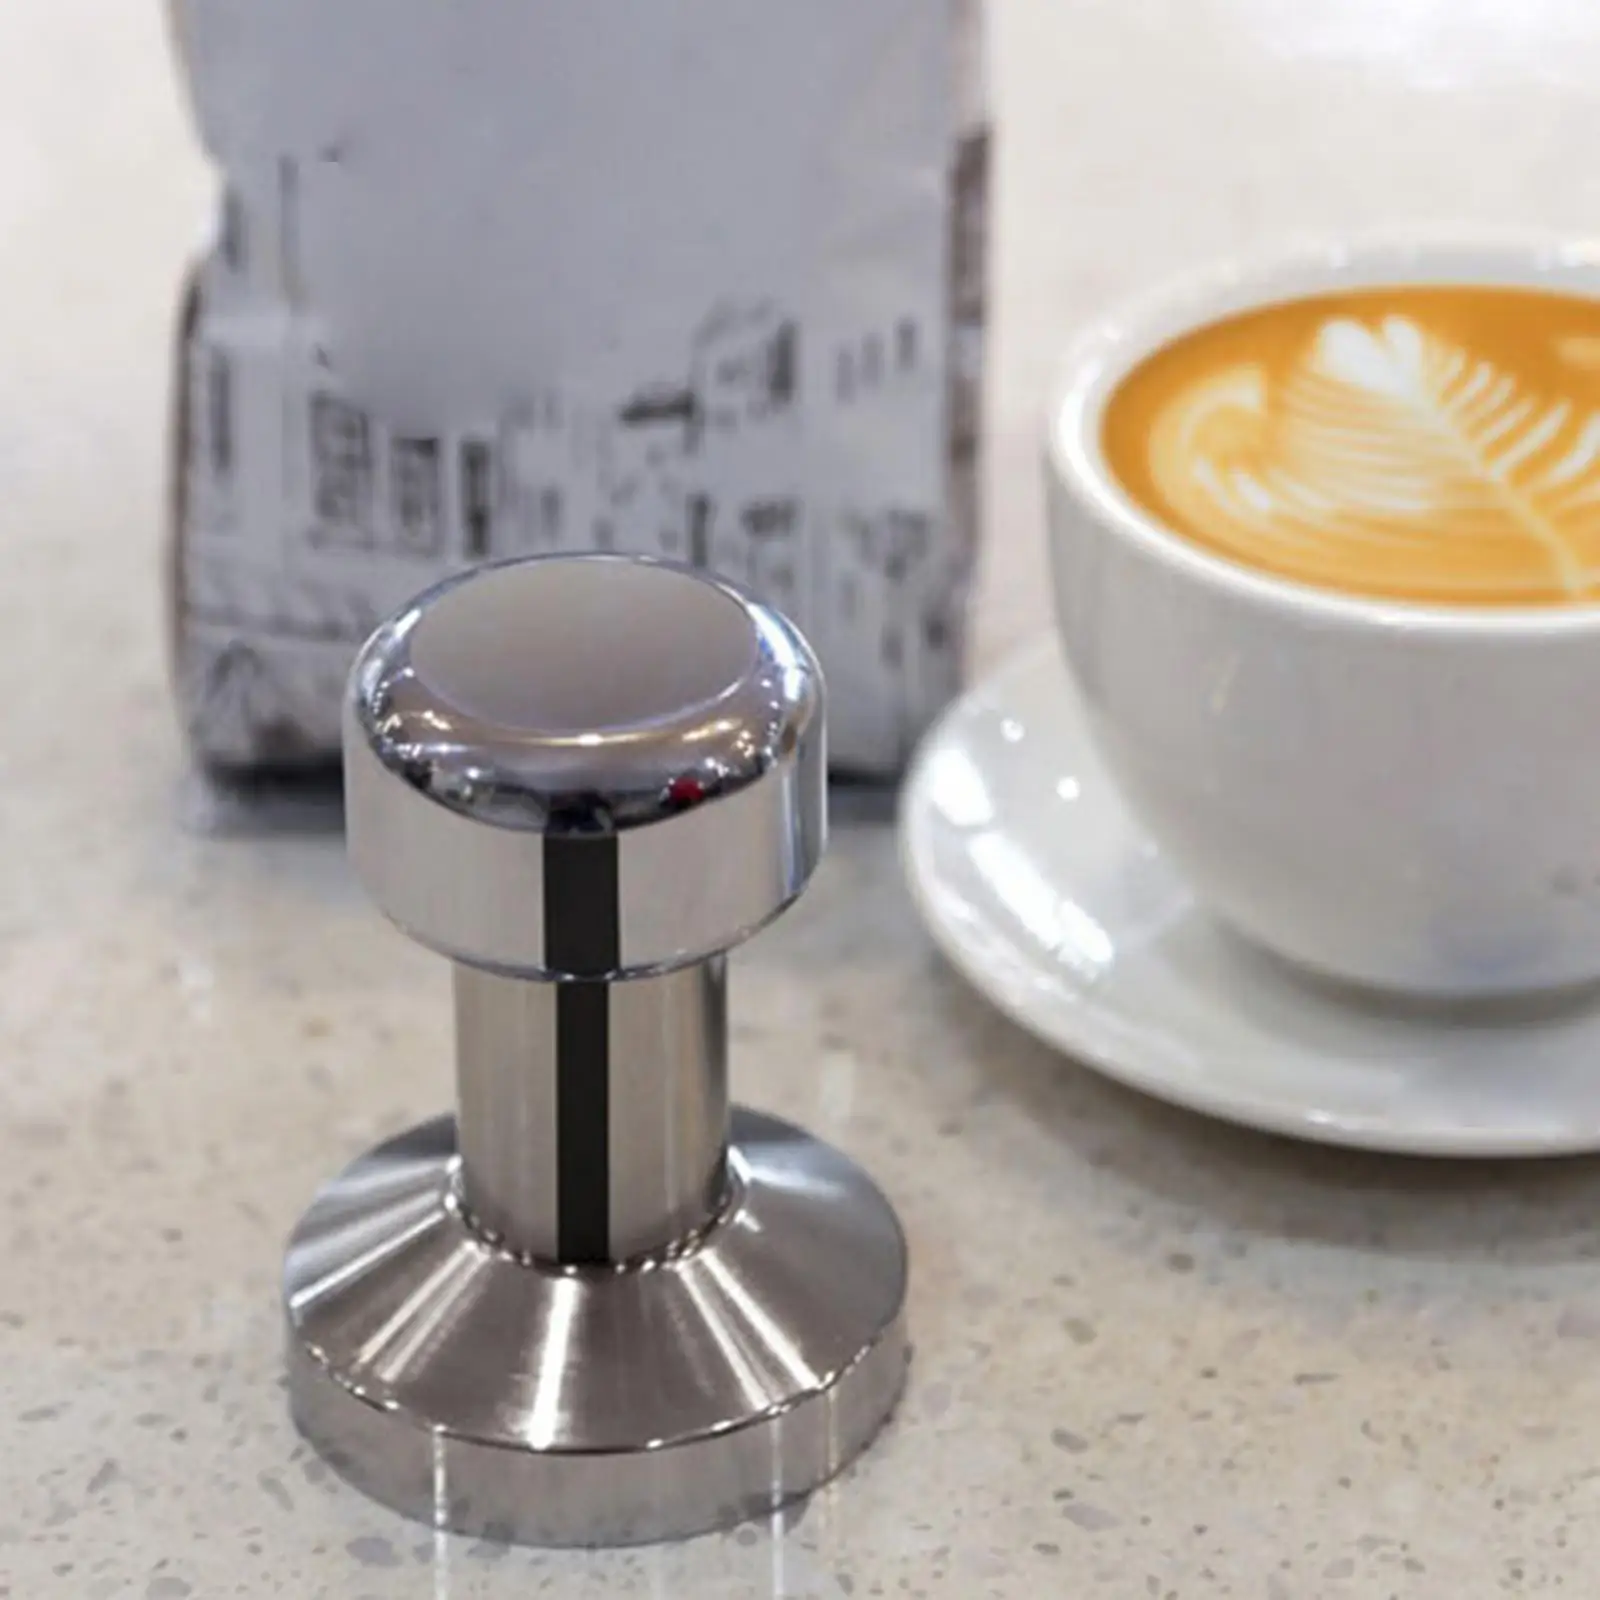 58mm Espresso Tamper Coffee Bean Press Flat Base Coffee Tamp Tool Barista Tools Coffee Distributor for Restaurants Cafe Supplies